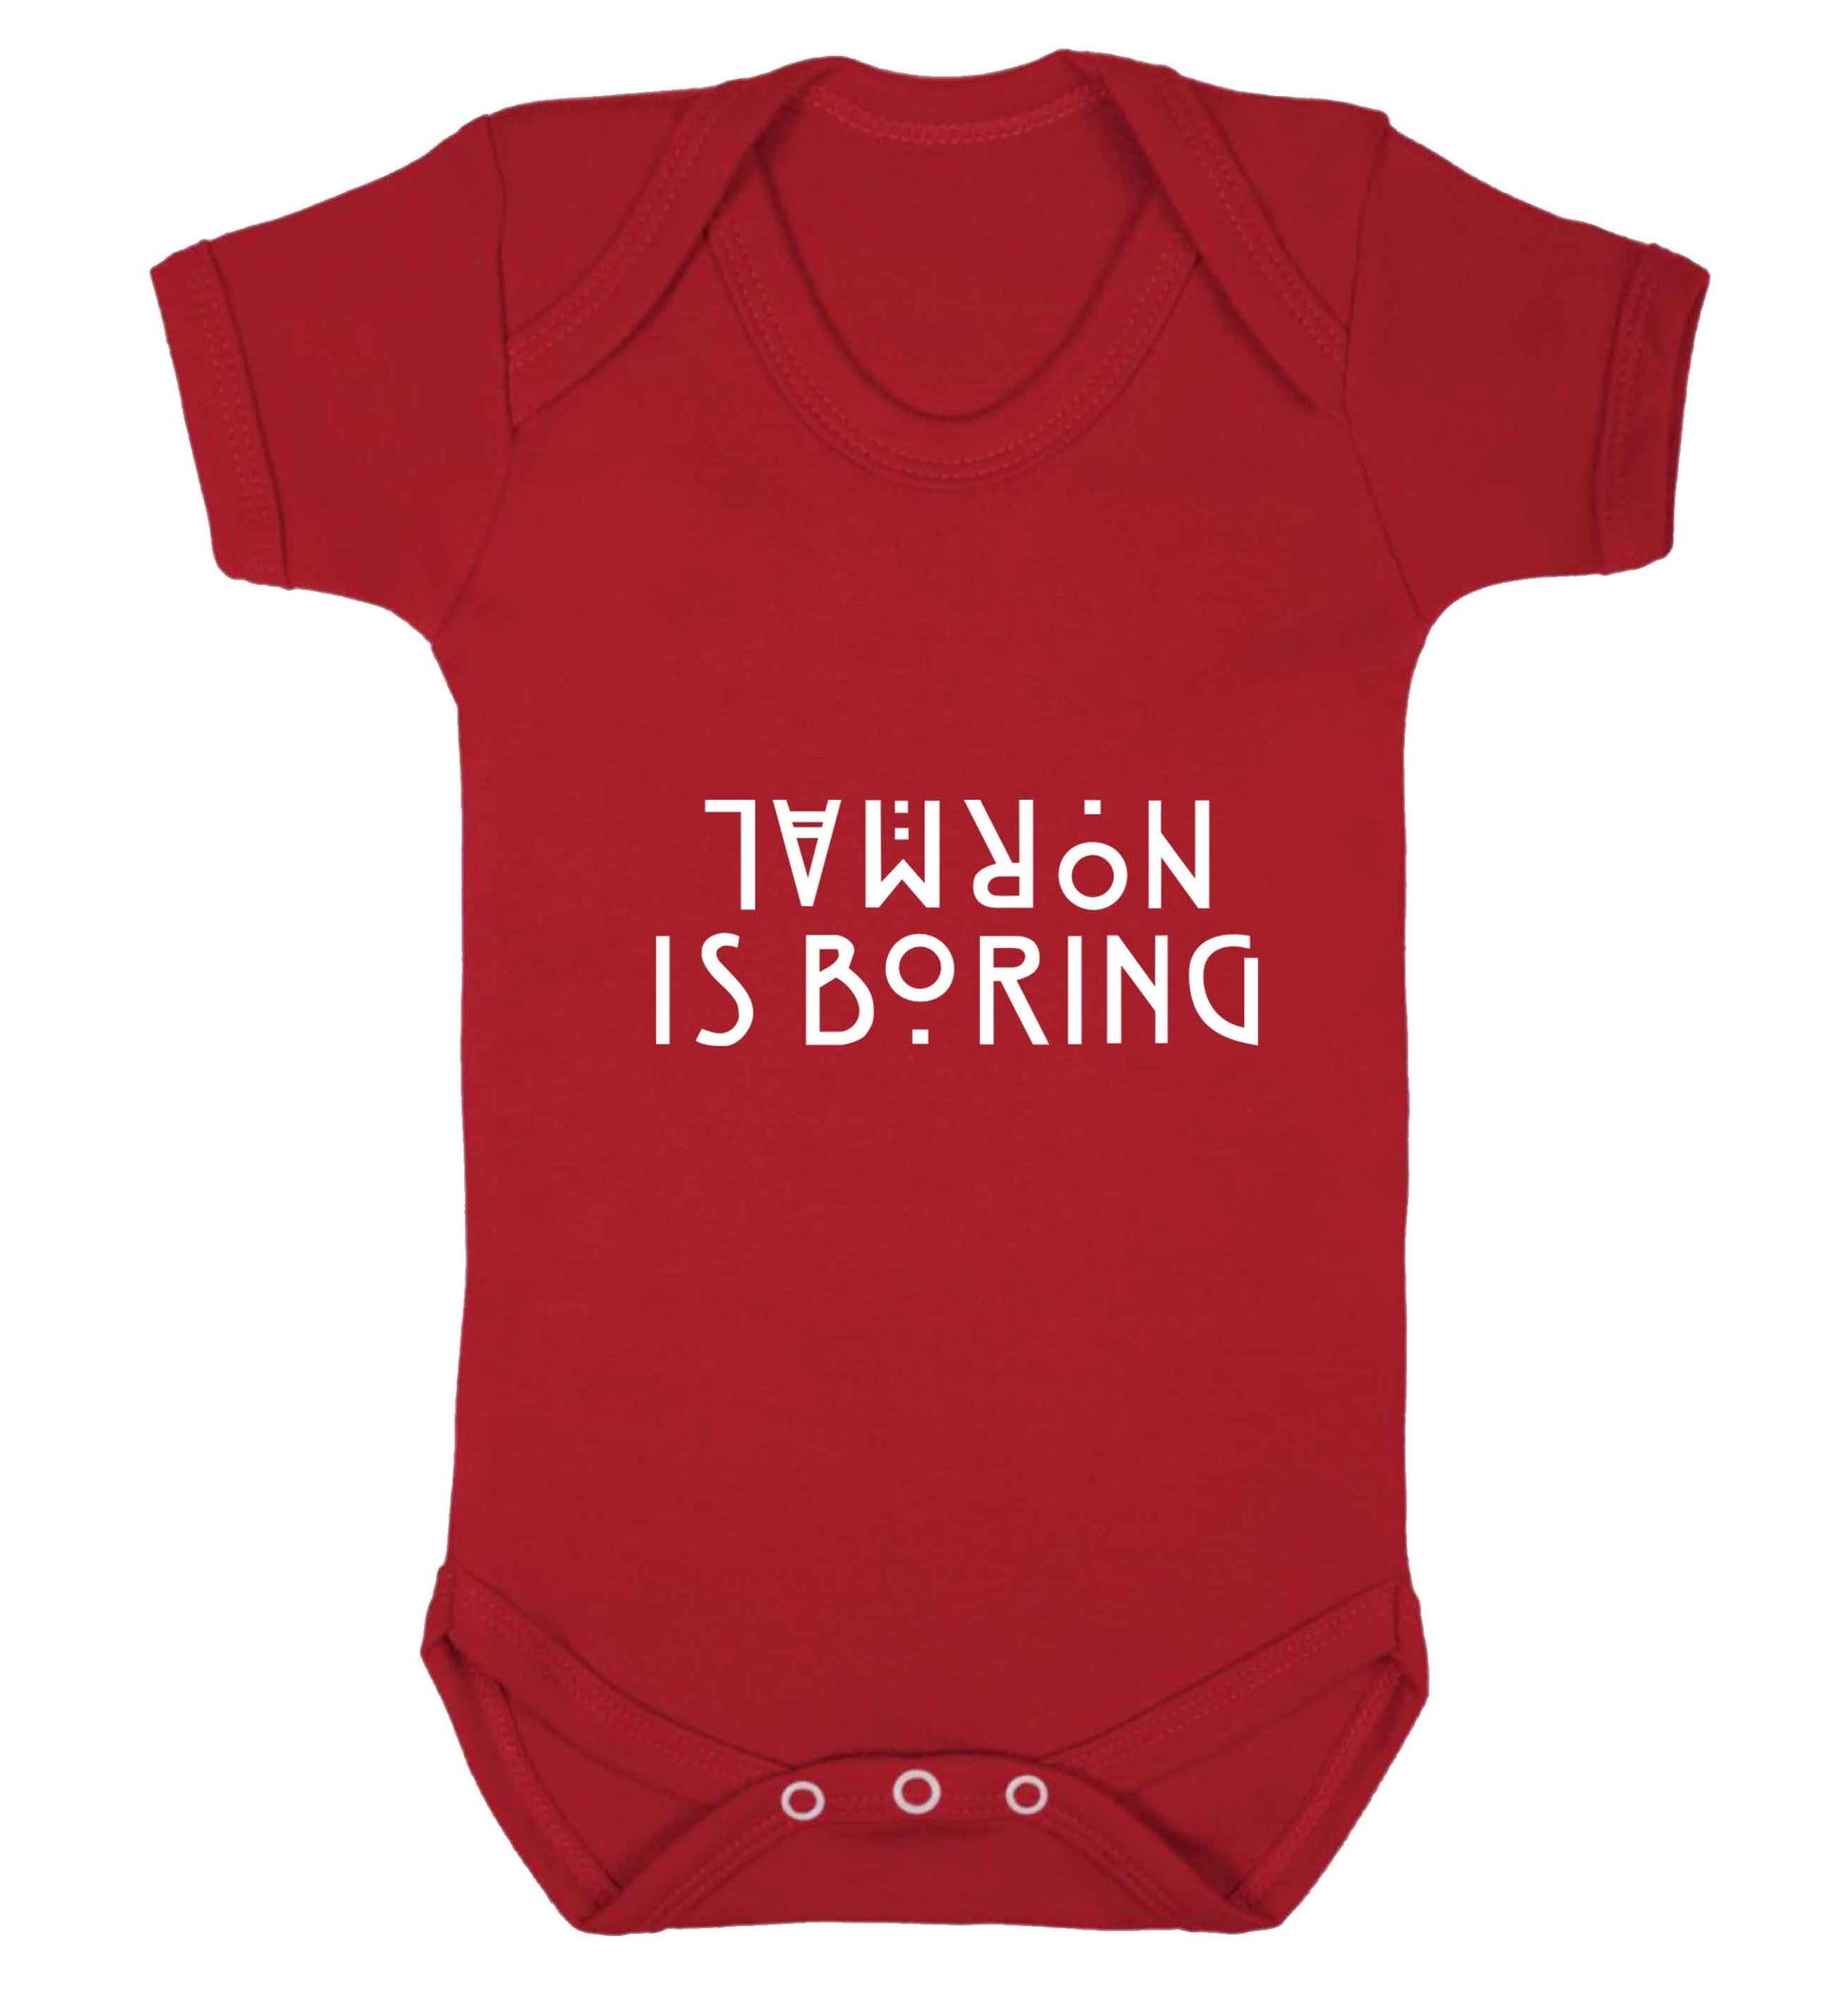 Normal is boring baby vest red 18-24 months